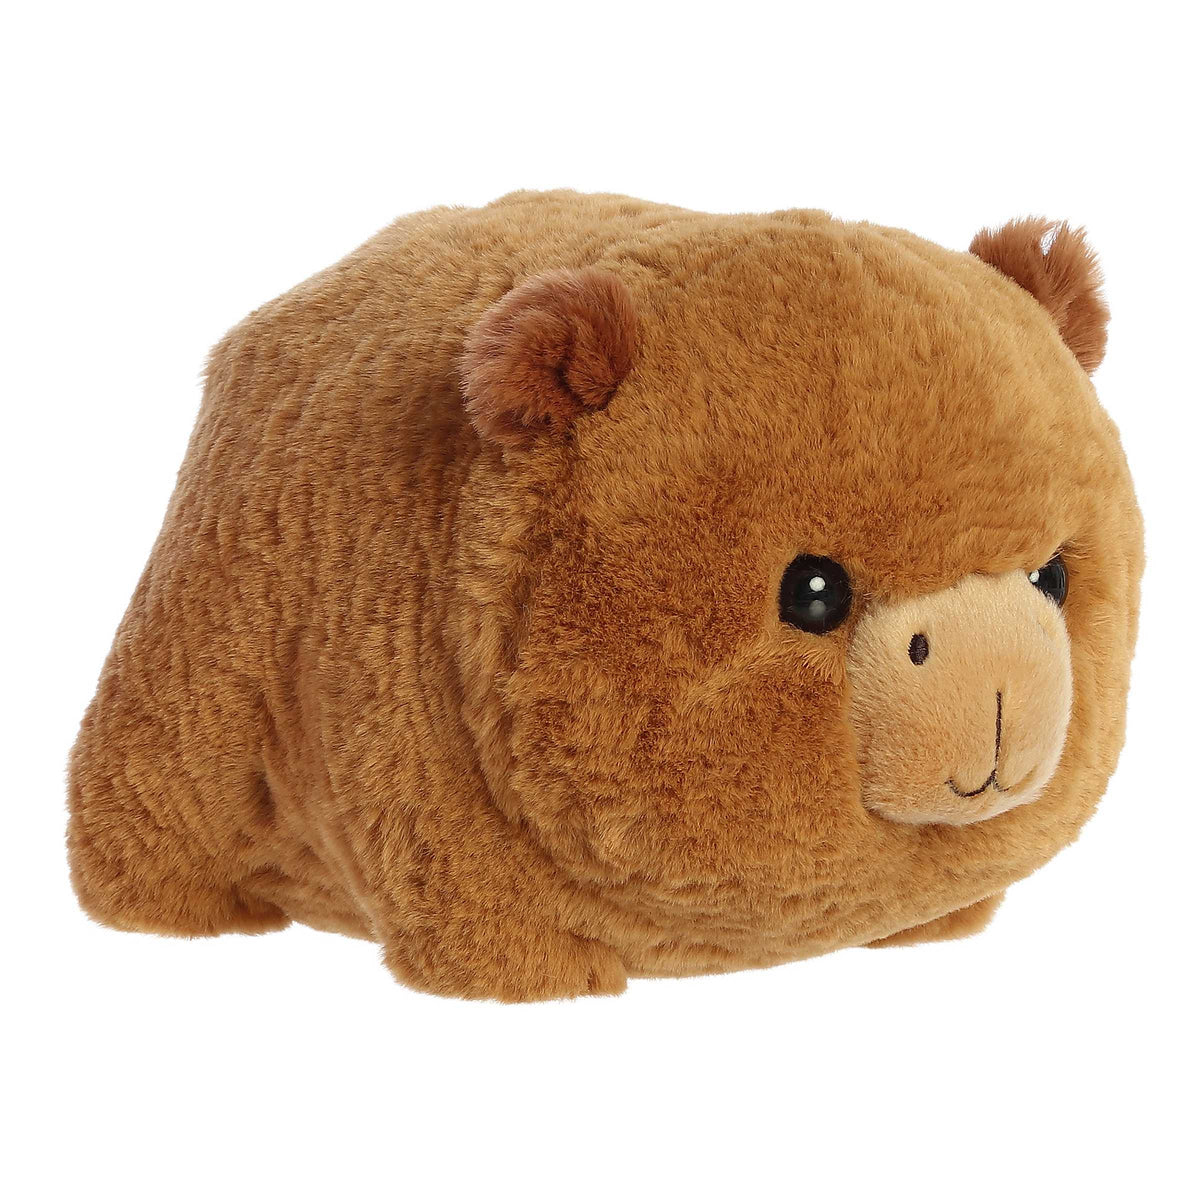 Carmen Capybara plush from Spudsters, with a potato-inspired design and soft fabric